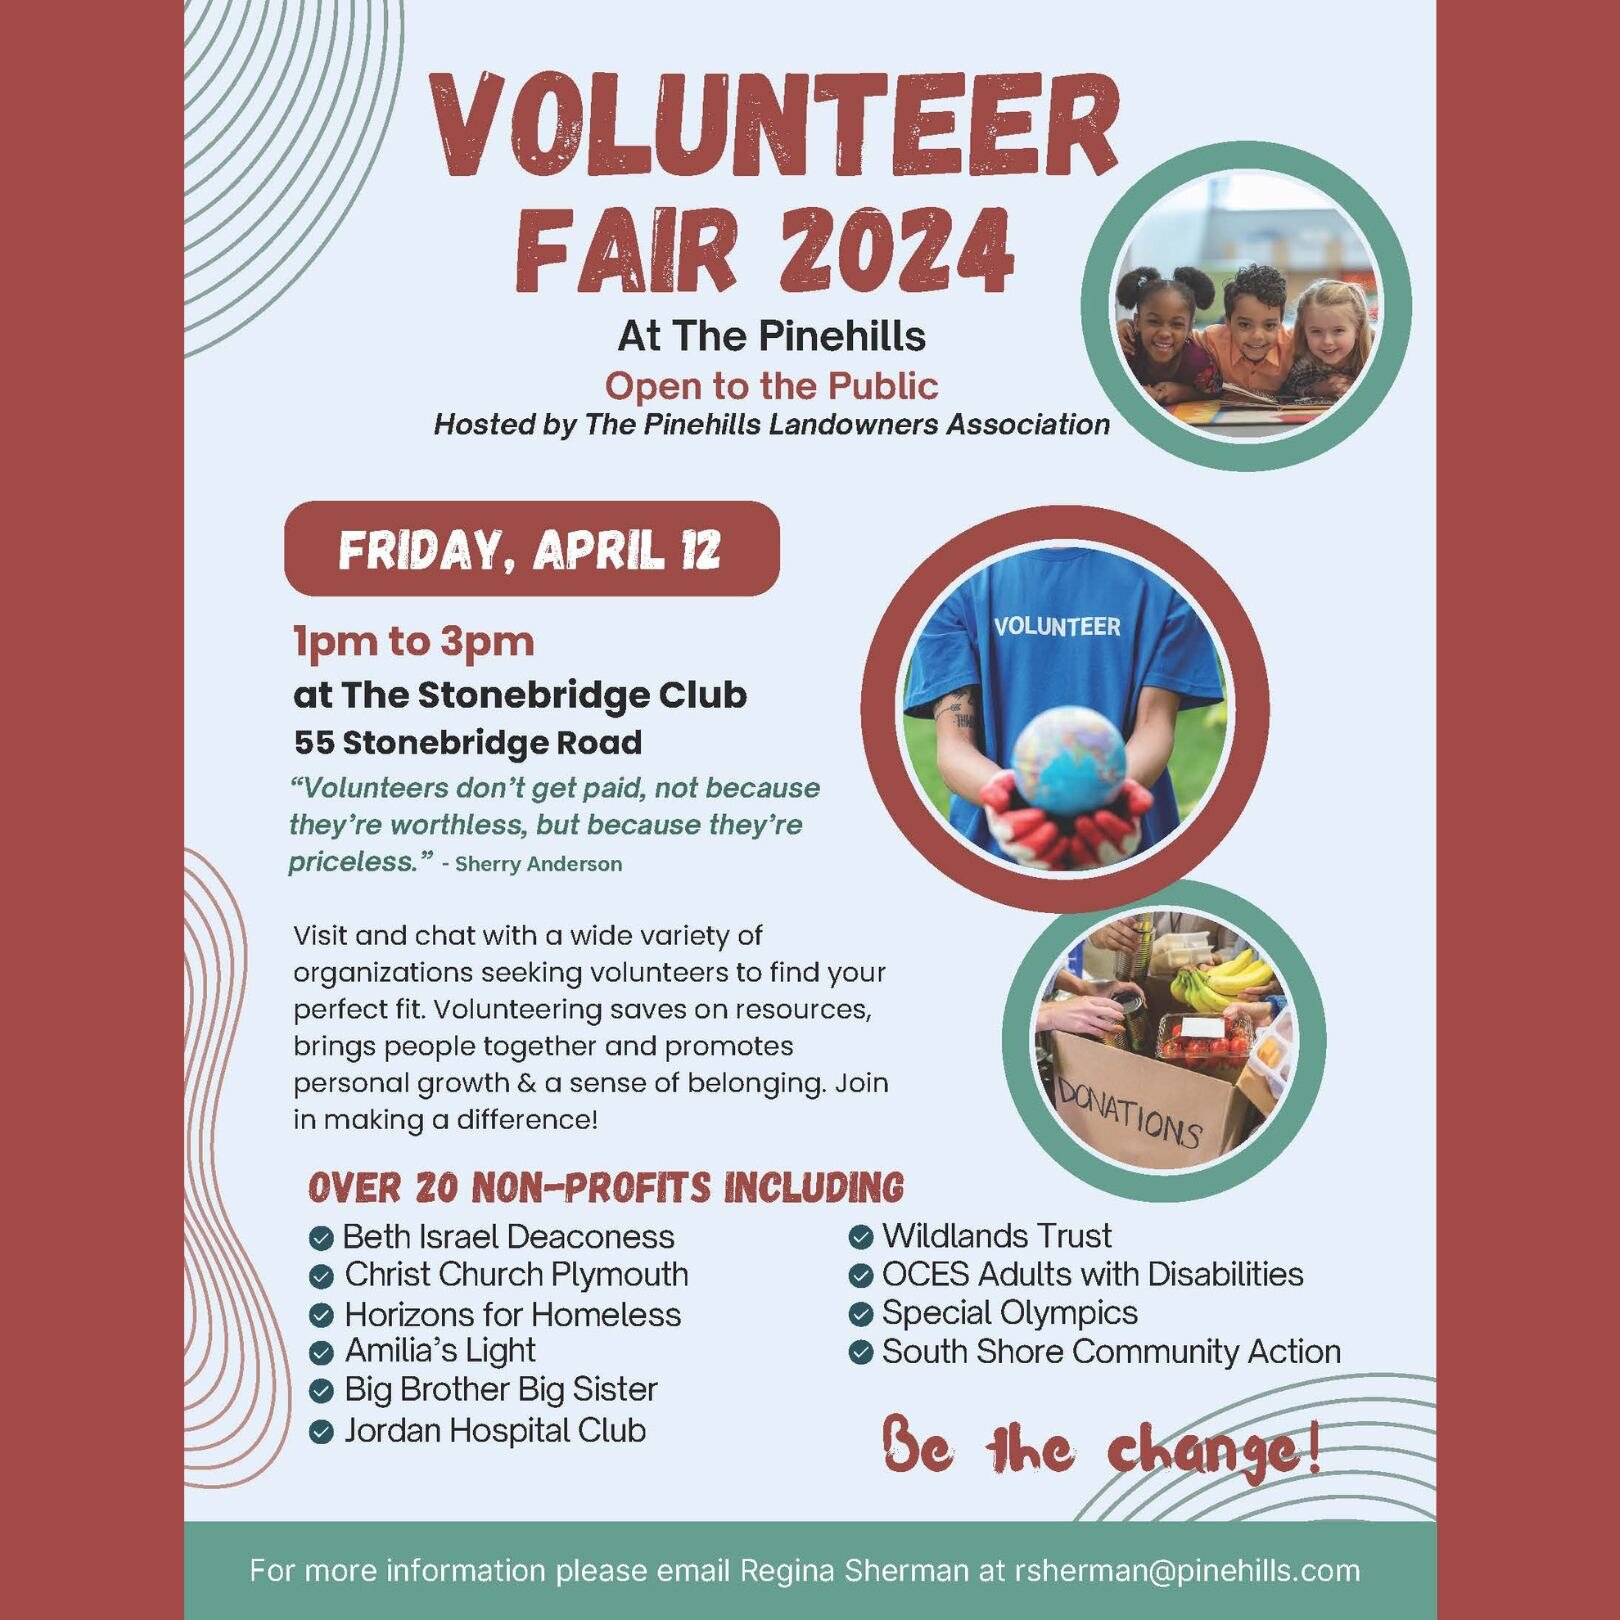 We 💚 our volunteers!

There are many ways you can lend your time, talent, knowledge, and passion to our mission. Visit our table at @the_pinehills Volunteer Fair this Friday (1-3 PM) to find the right opportunity for you!

Learn more: bit.ly/vol-fai